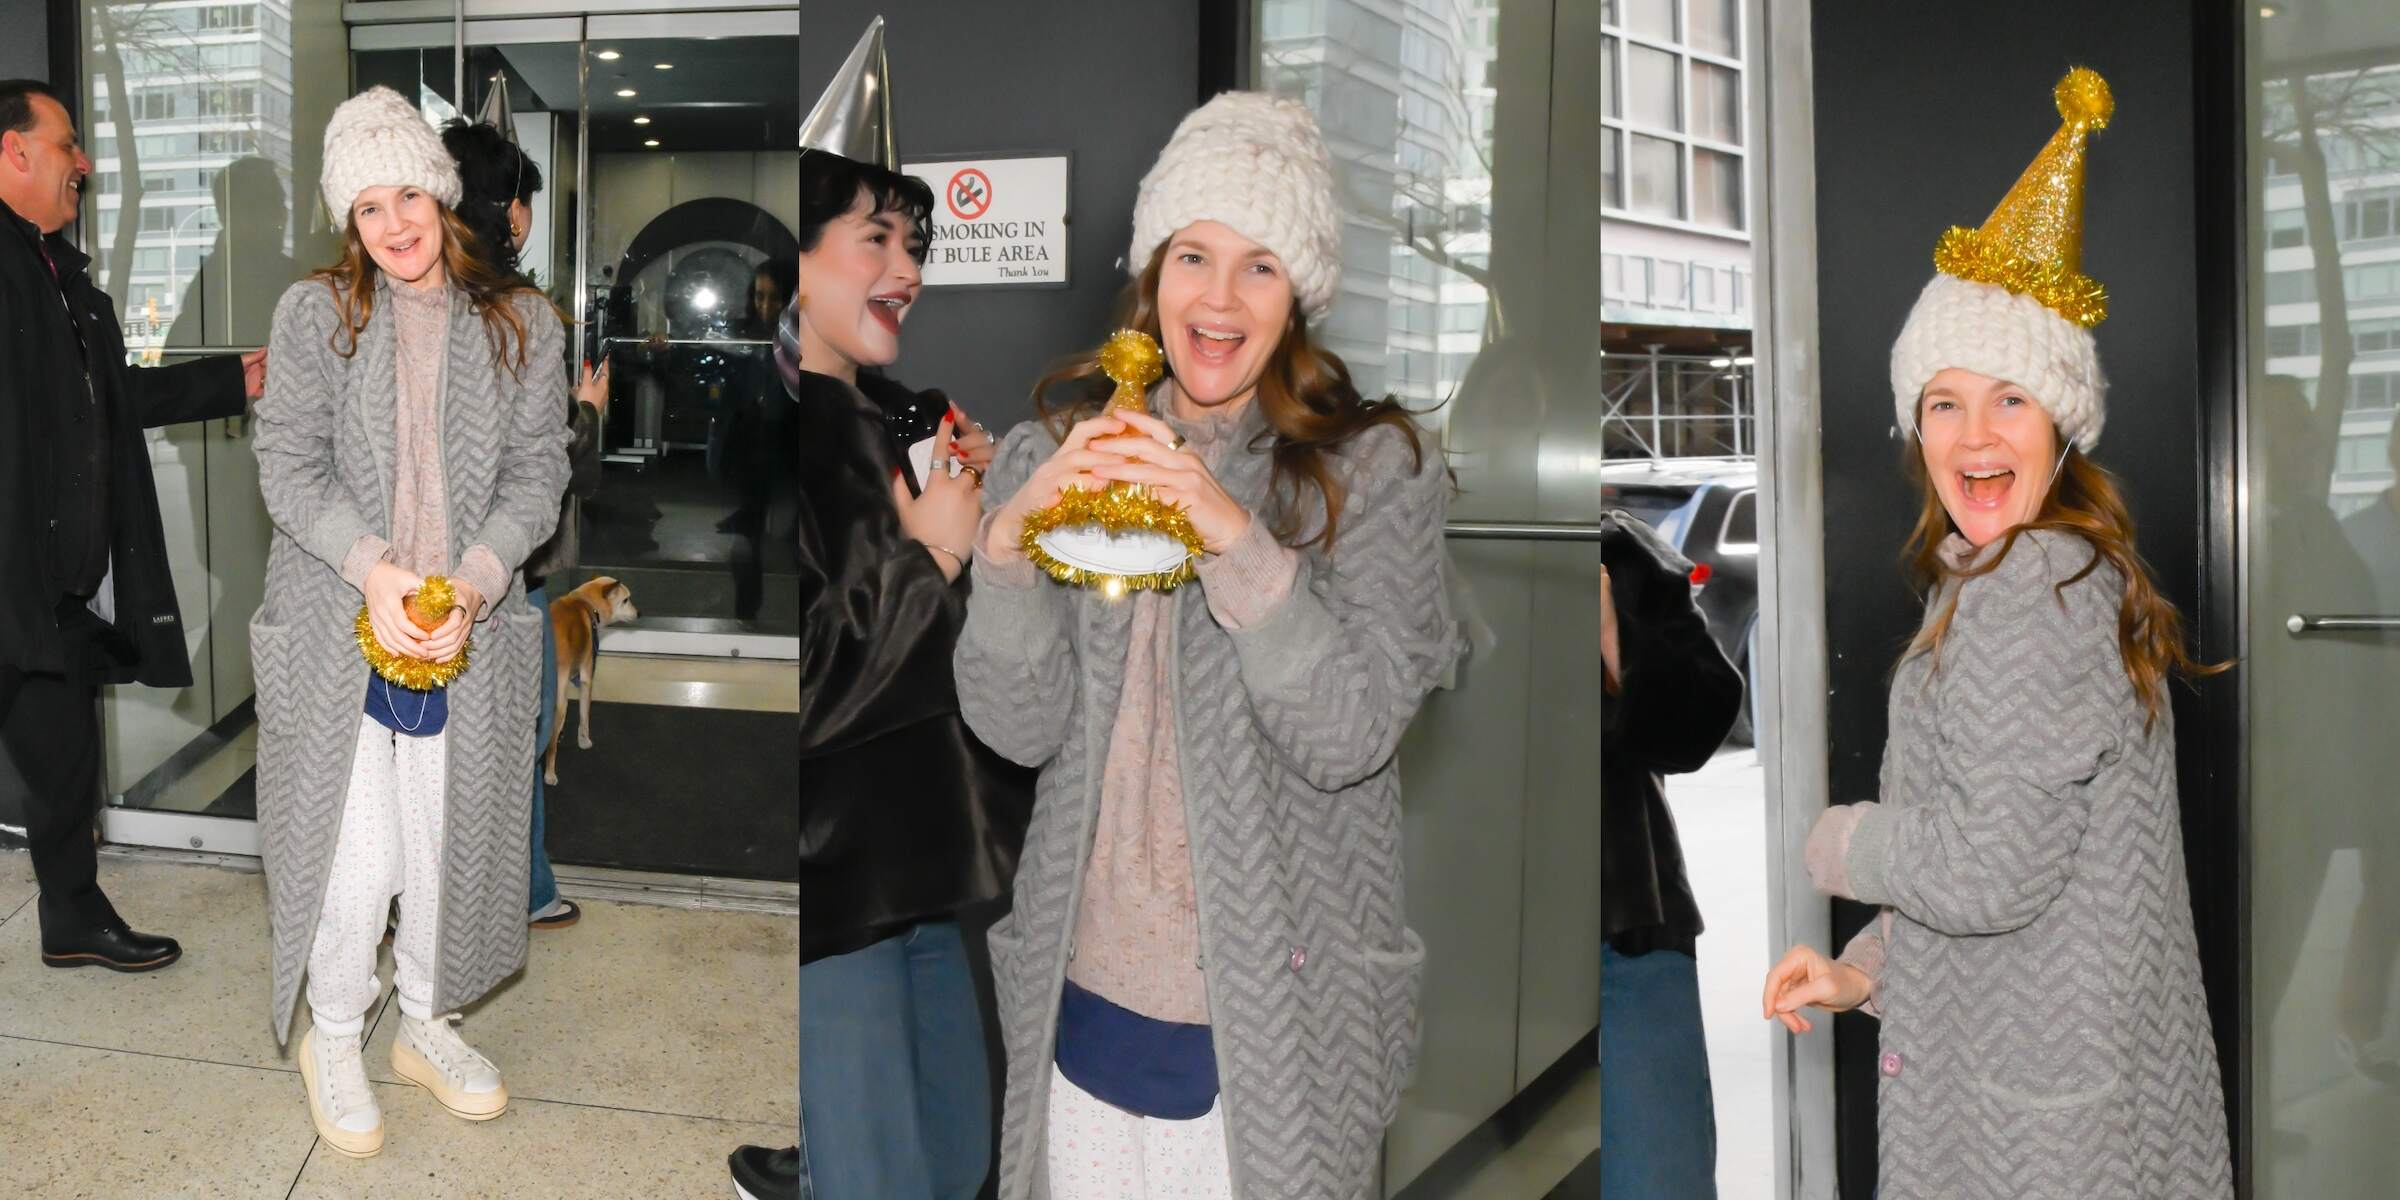 TV host Drew Barrymore wears a birthday hat on her birthday as she picks friends up from the airport